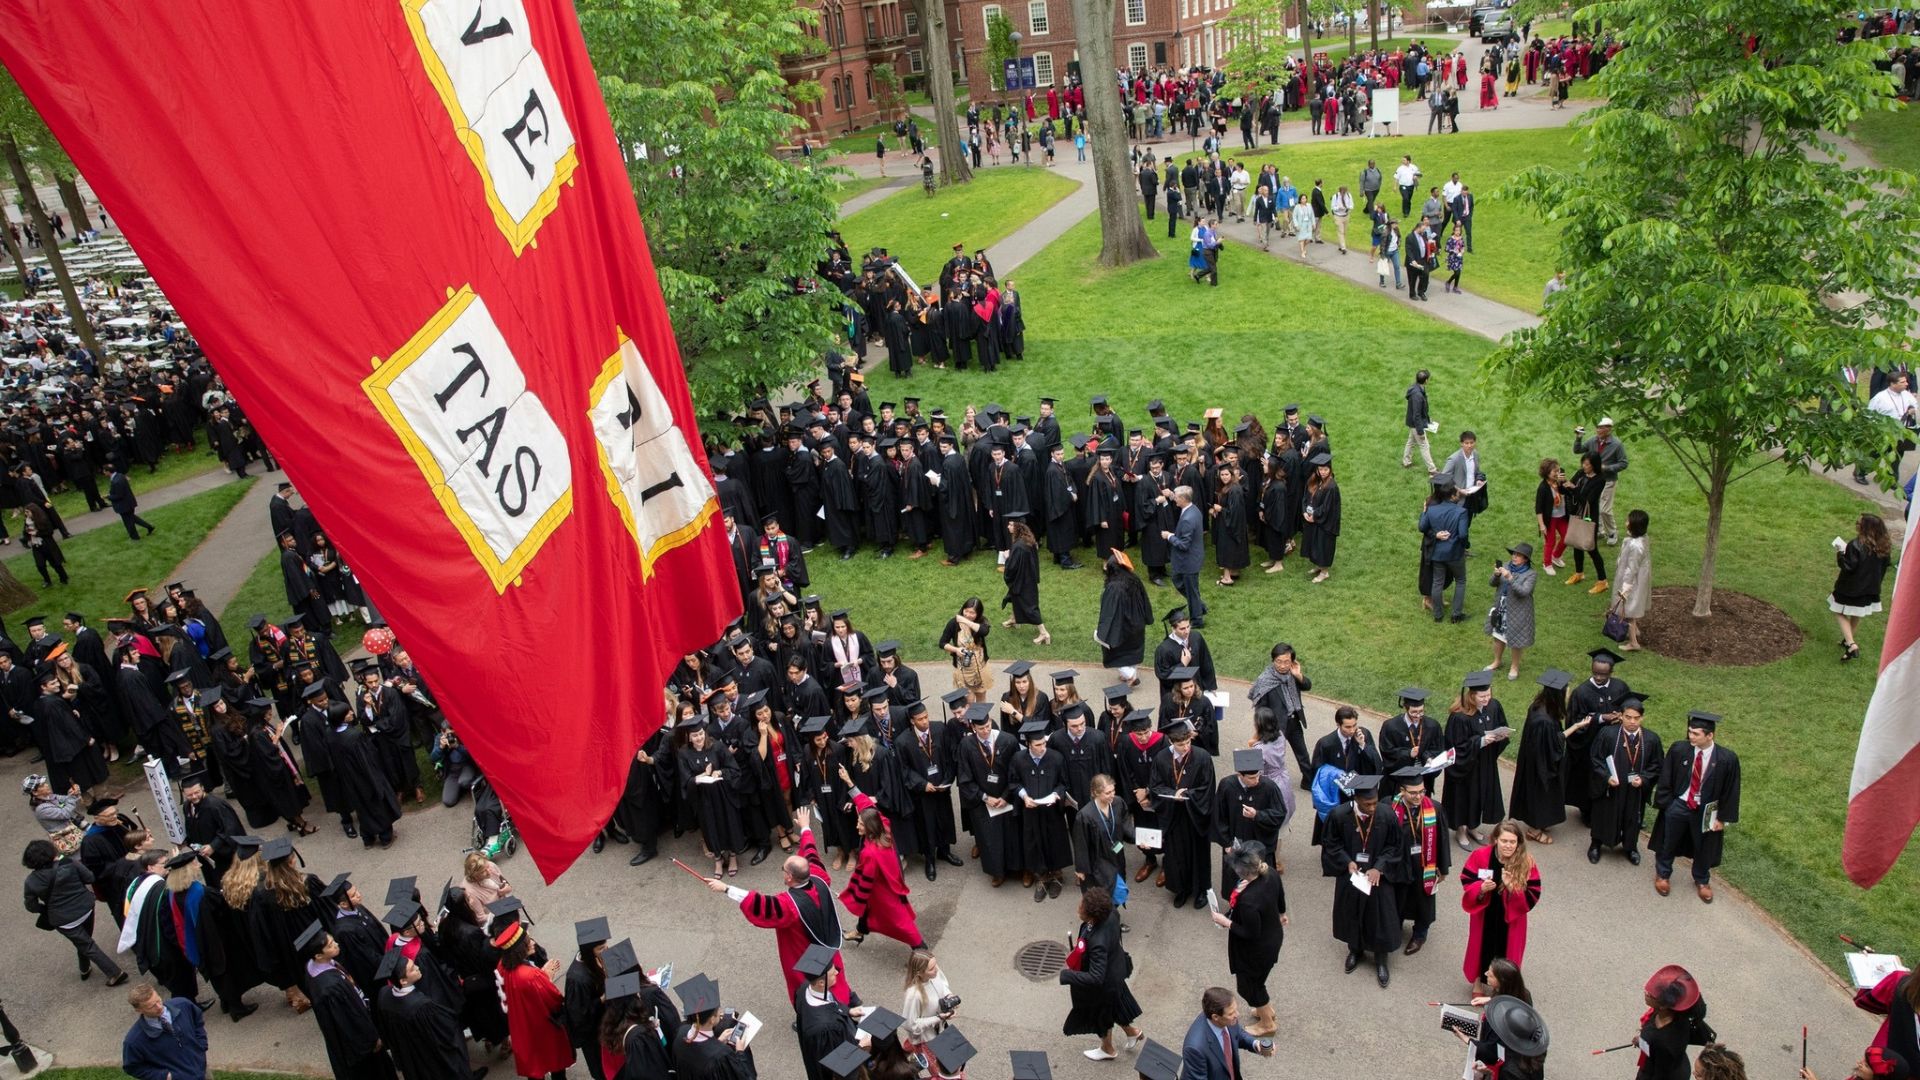 <p>In the midst of the commencement, Garber called for a moment of silence, <a href="https://www.nbcnews.com/news/us-news/students-walk-harvard-college-graduation-ucla-contends-new-protest-rcna153822">offering</a> "sympathy and empathy" towards those affected by the broader issues reflected in the protest. </p> <p>This moment signaled a somber recognition of the underlying tensions. </p>